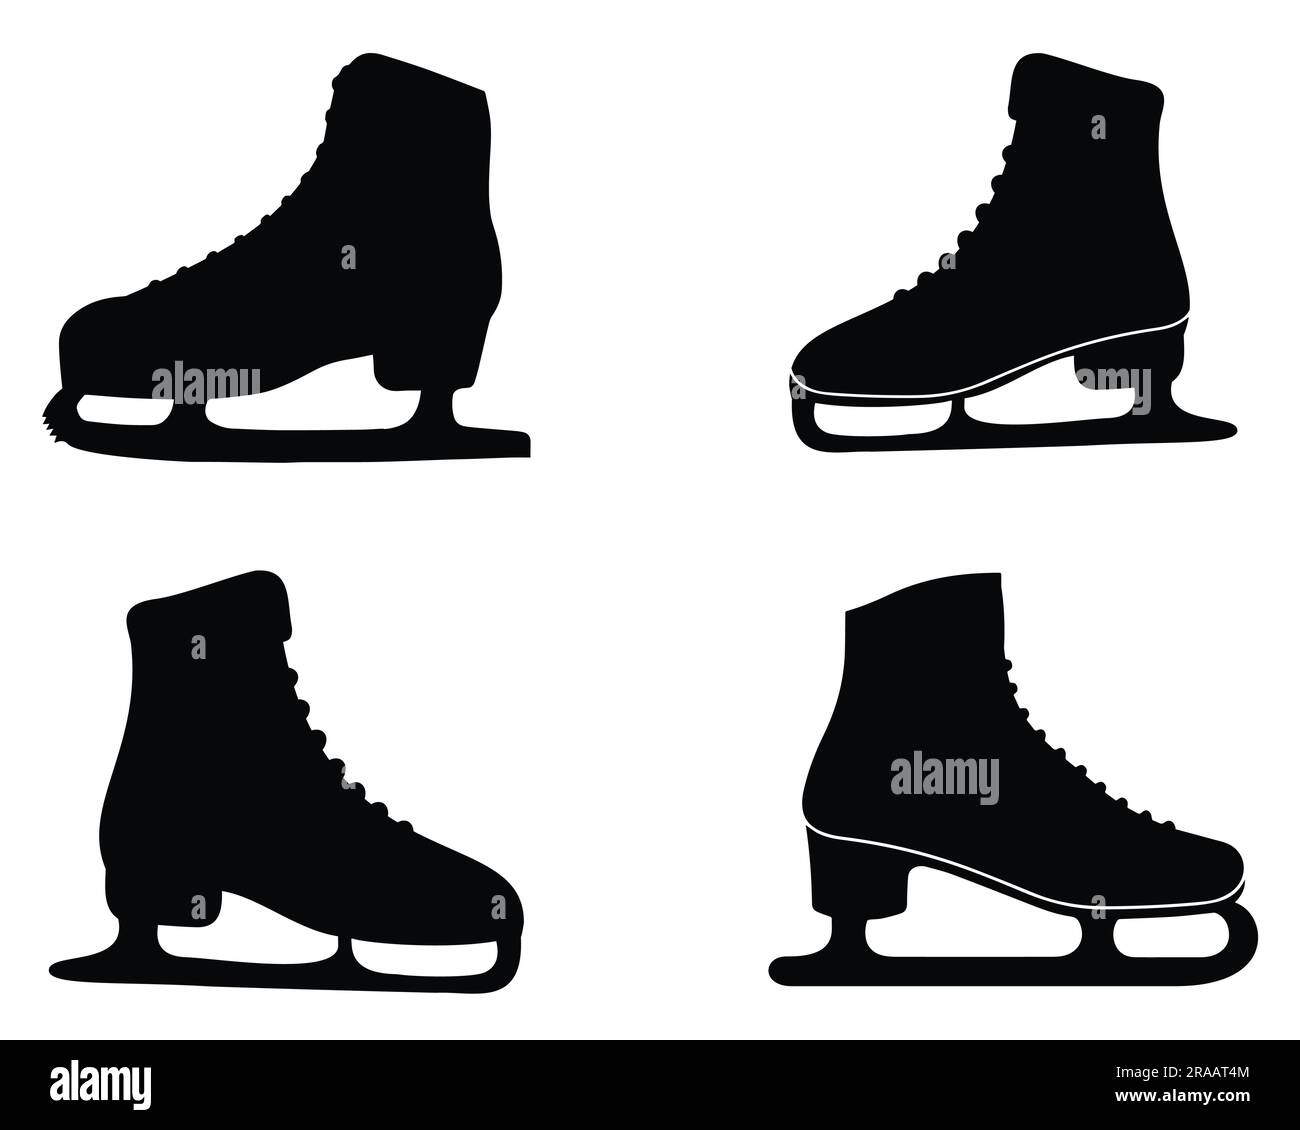 Set of Ice Skate Shoes Silhouette Stock Vector